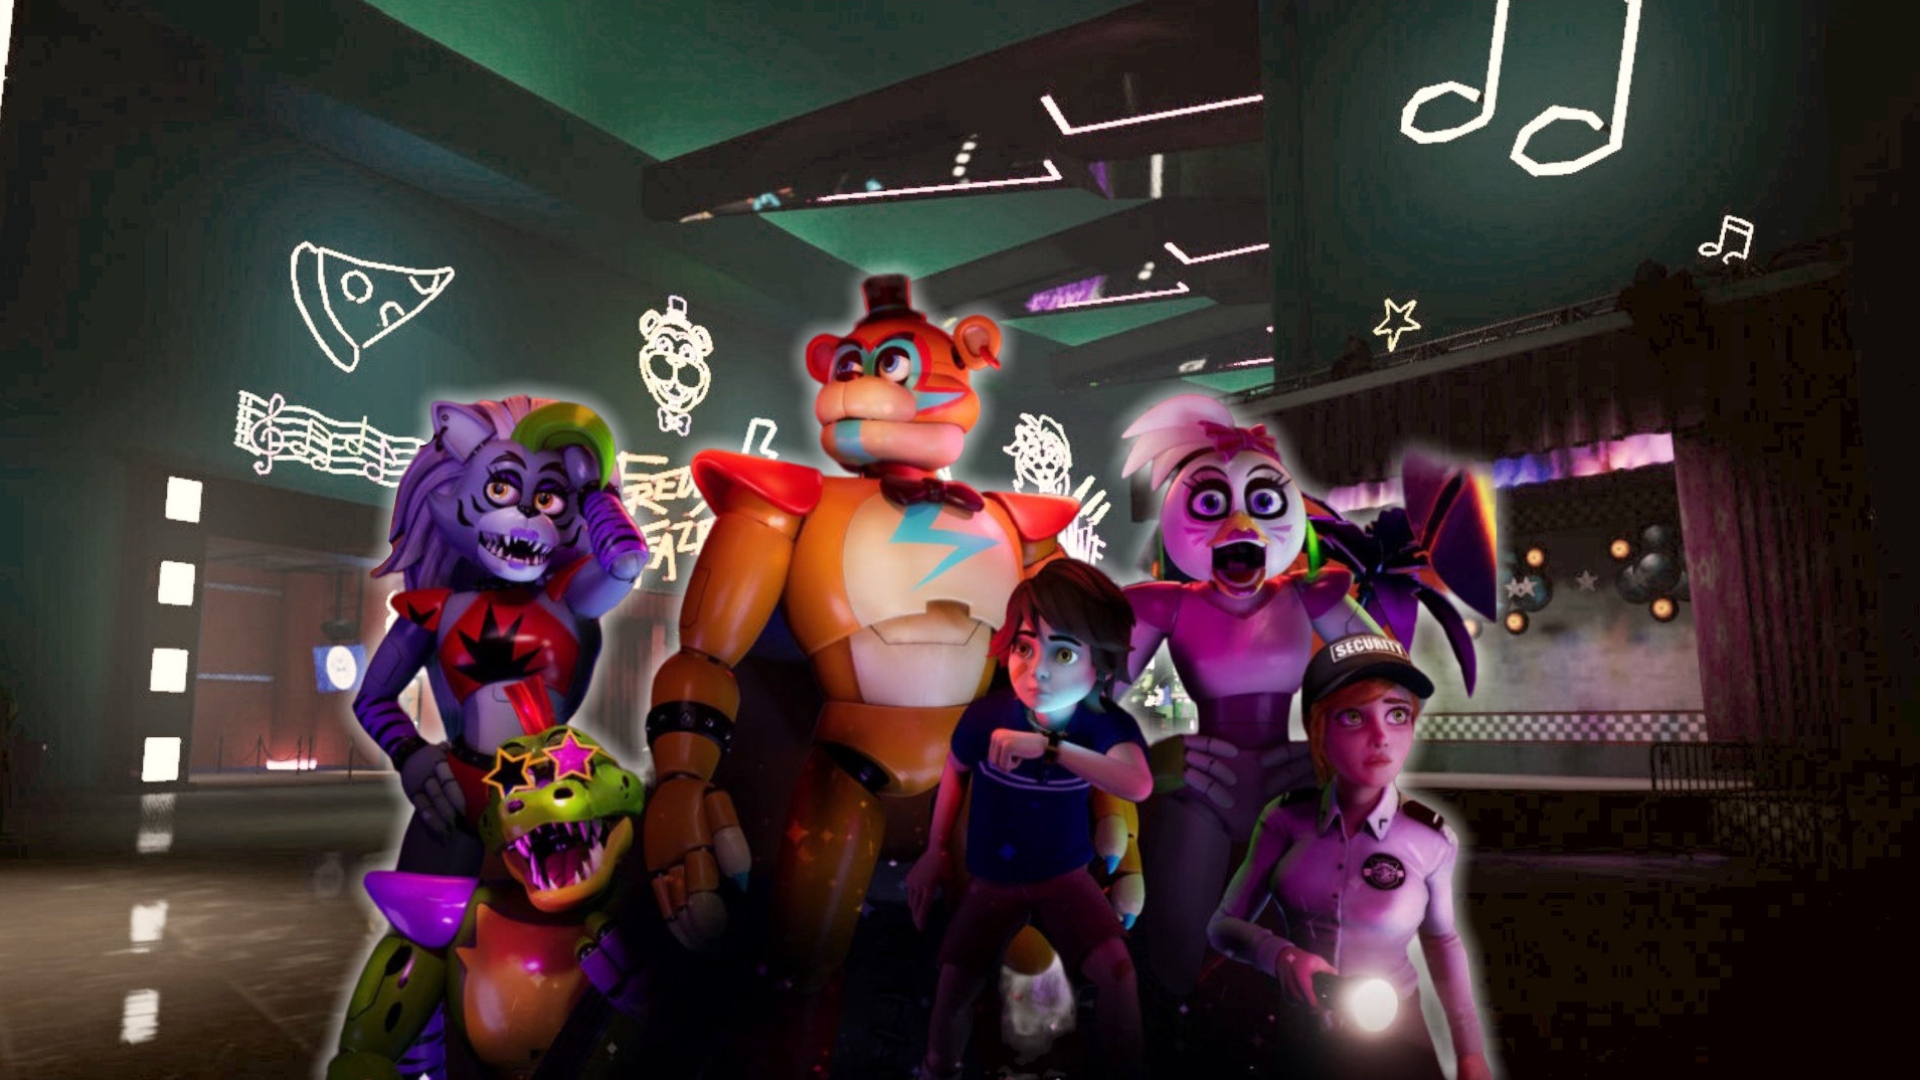 Five Nights at Freddy's HD Five Nights at Freddy's Security Breach  Wallpapers, HD Wallpapers